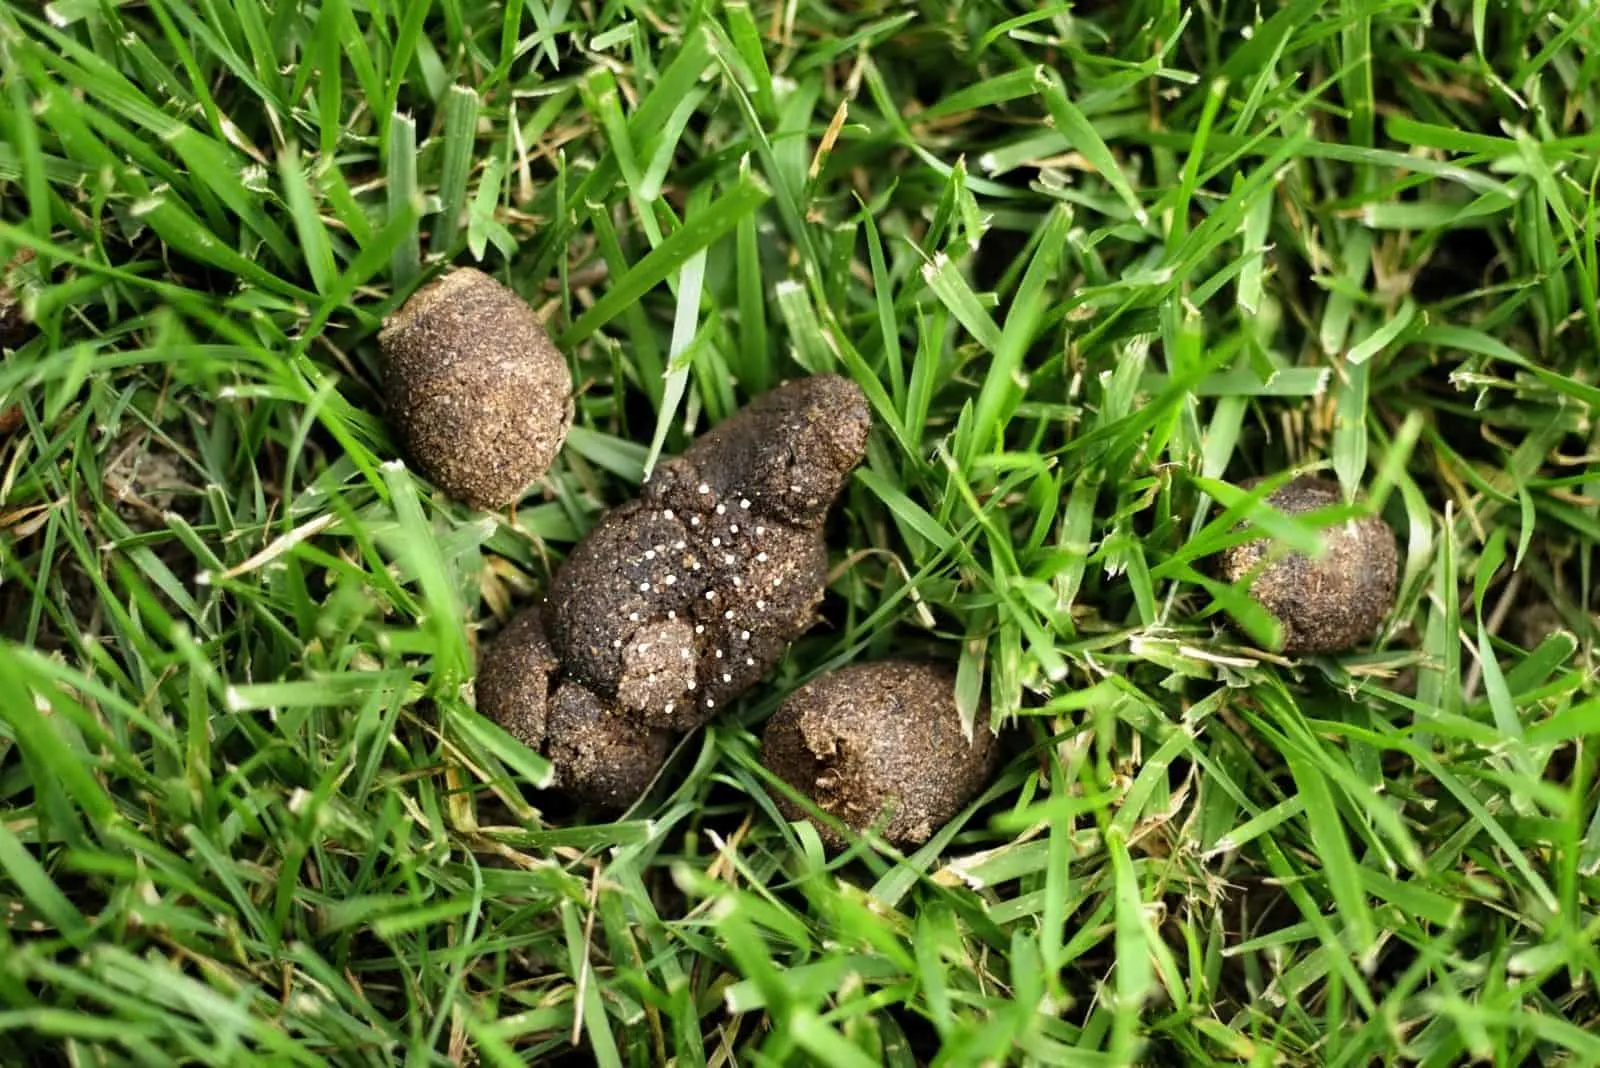 why is my dogs poop white and crumbly